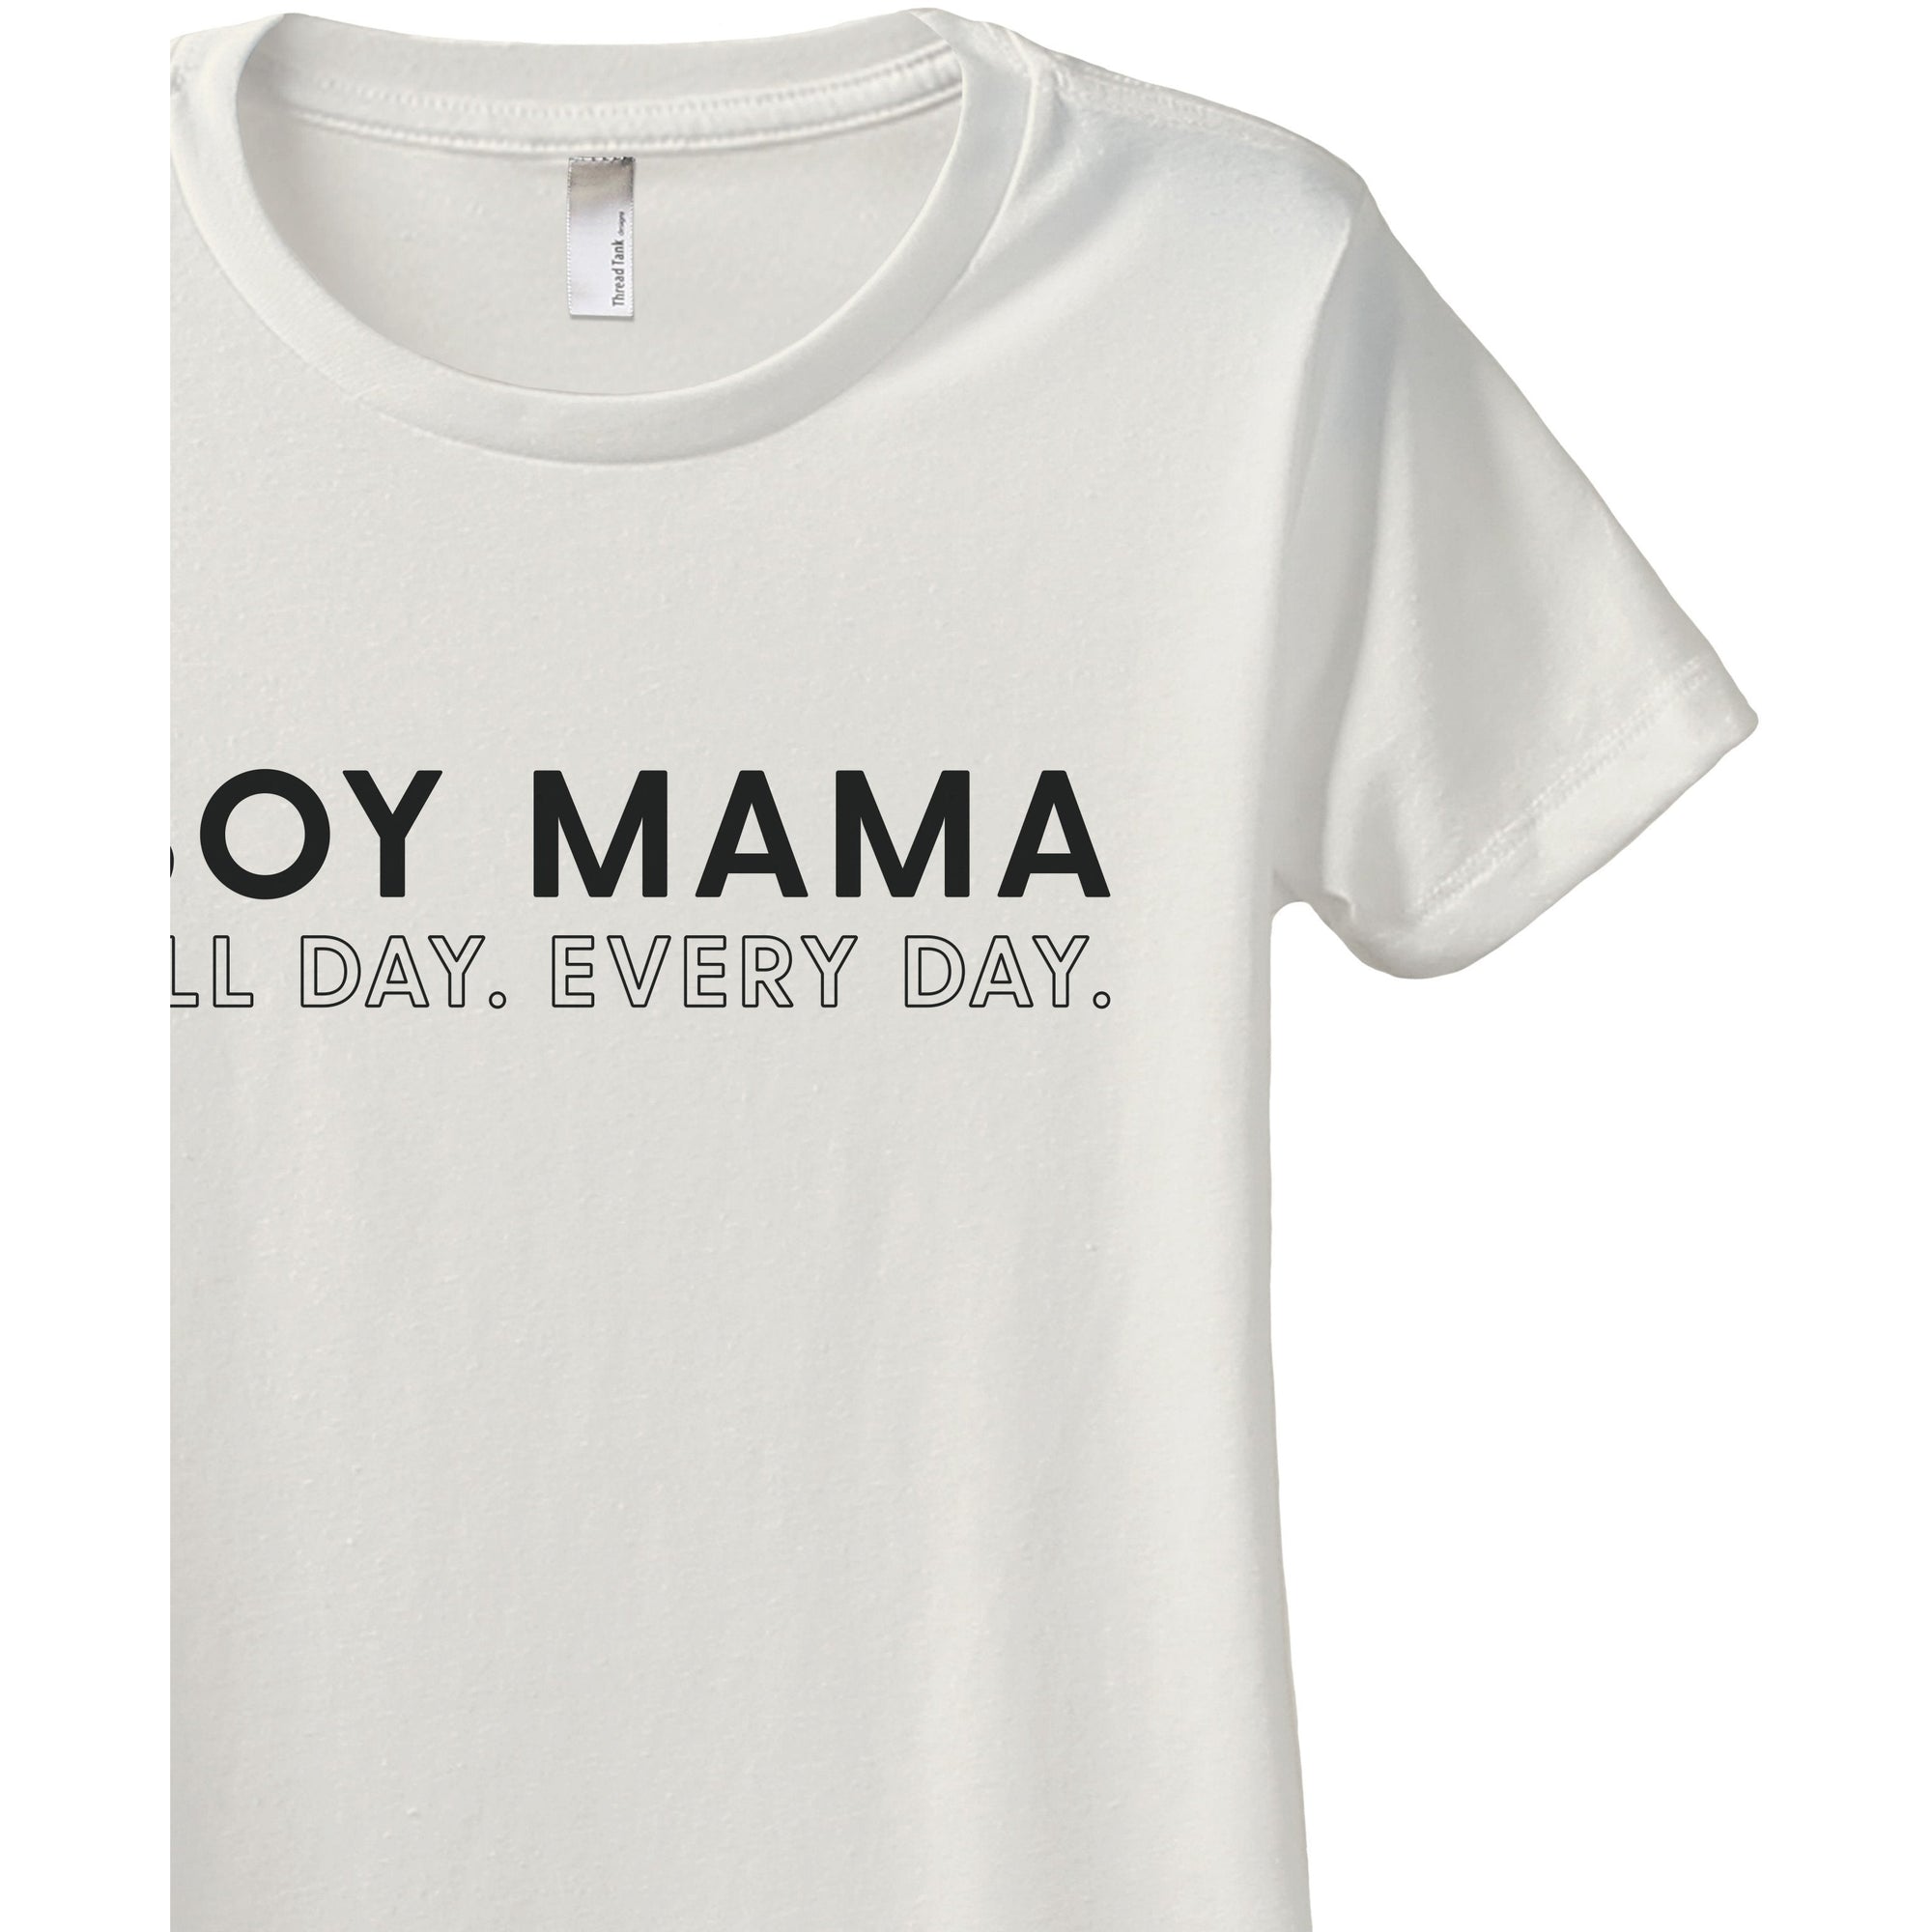 Boy Mama All Day Every Day Women's Relaxed Crewneck T-Shirt Top Tee Vintage White Zoom Details
